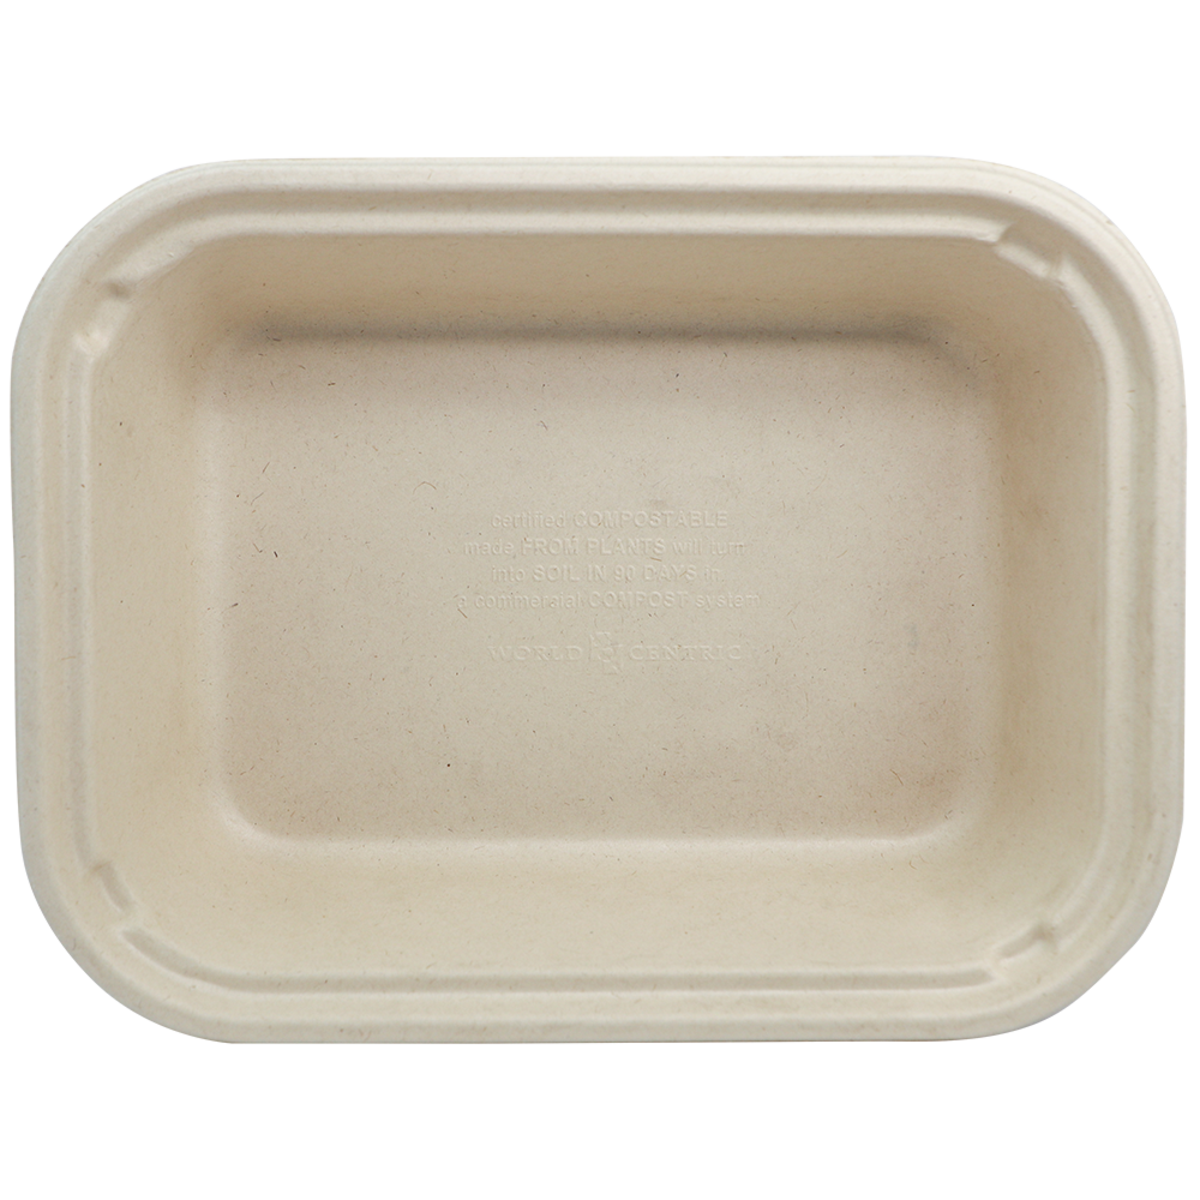 60 oz Fiber To Go Container | 10" x 7.5" x 2.5" | Compostable (Pack of 50)